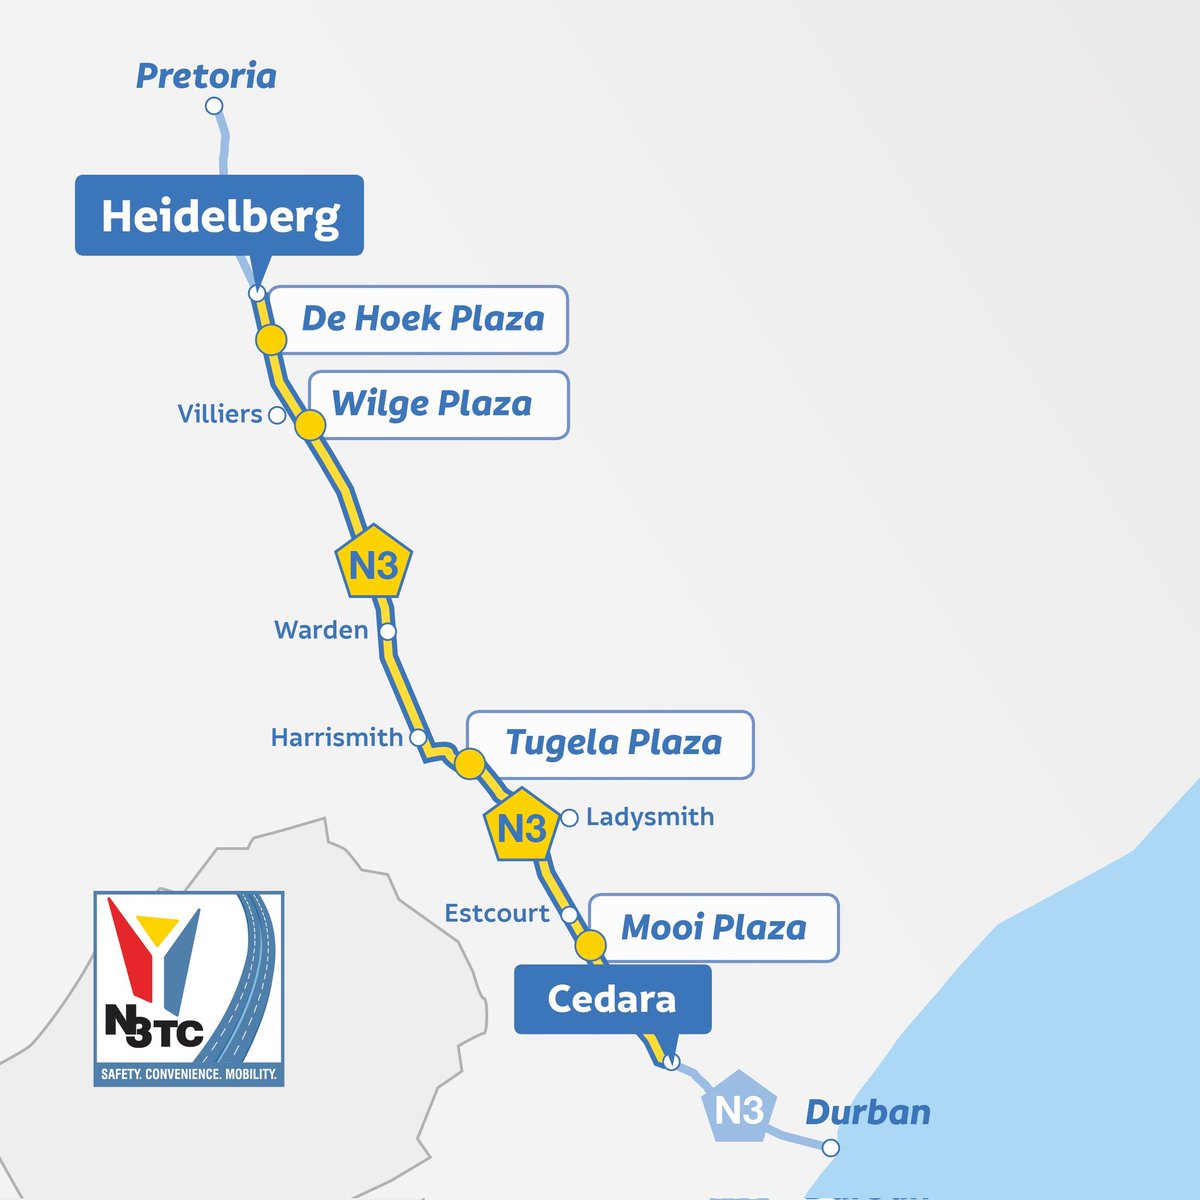 SUDÁFRICA - 16h59 01/05 N3Weather: Clear conditions along the N3TollRoute from Cedara I/C 96 to Heidelberg I/C 59. Please drive safely and take care. (02)